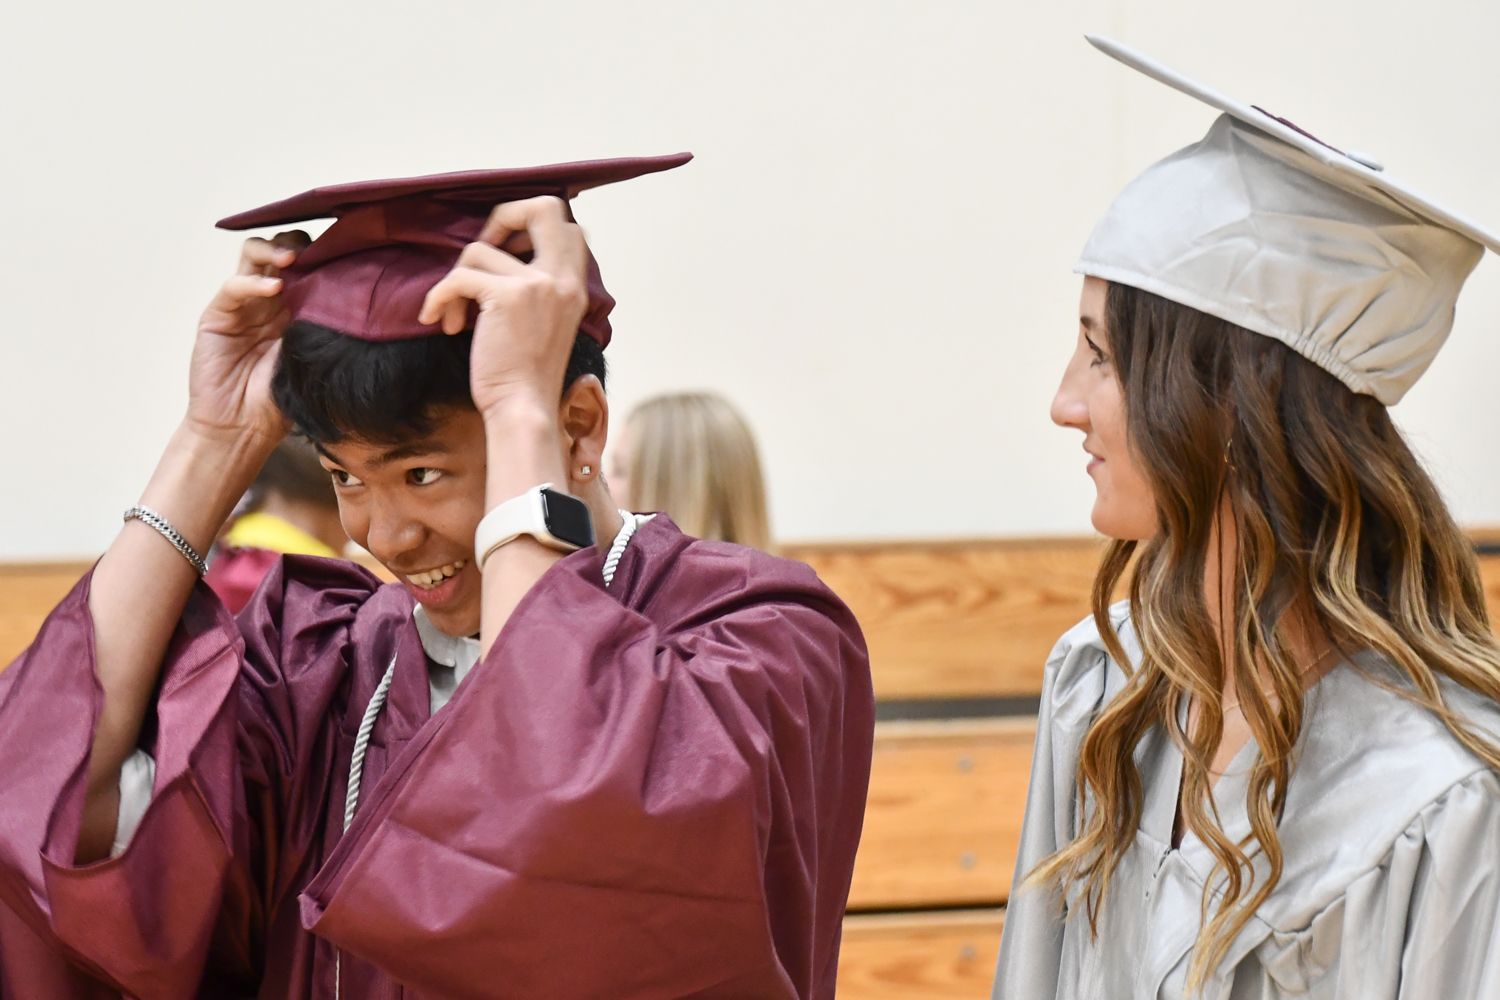 Guy and girl in the small gym prior to graduation. He is adjusting his mortar board and she is looking on, smiling